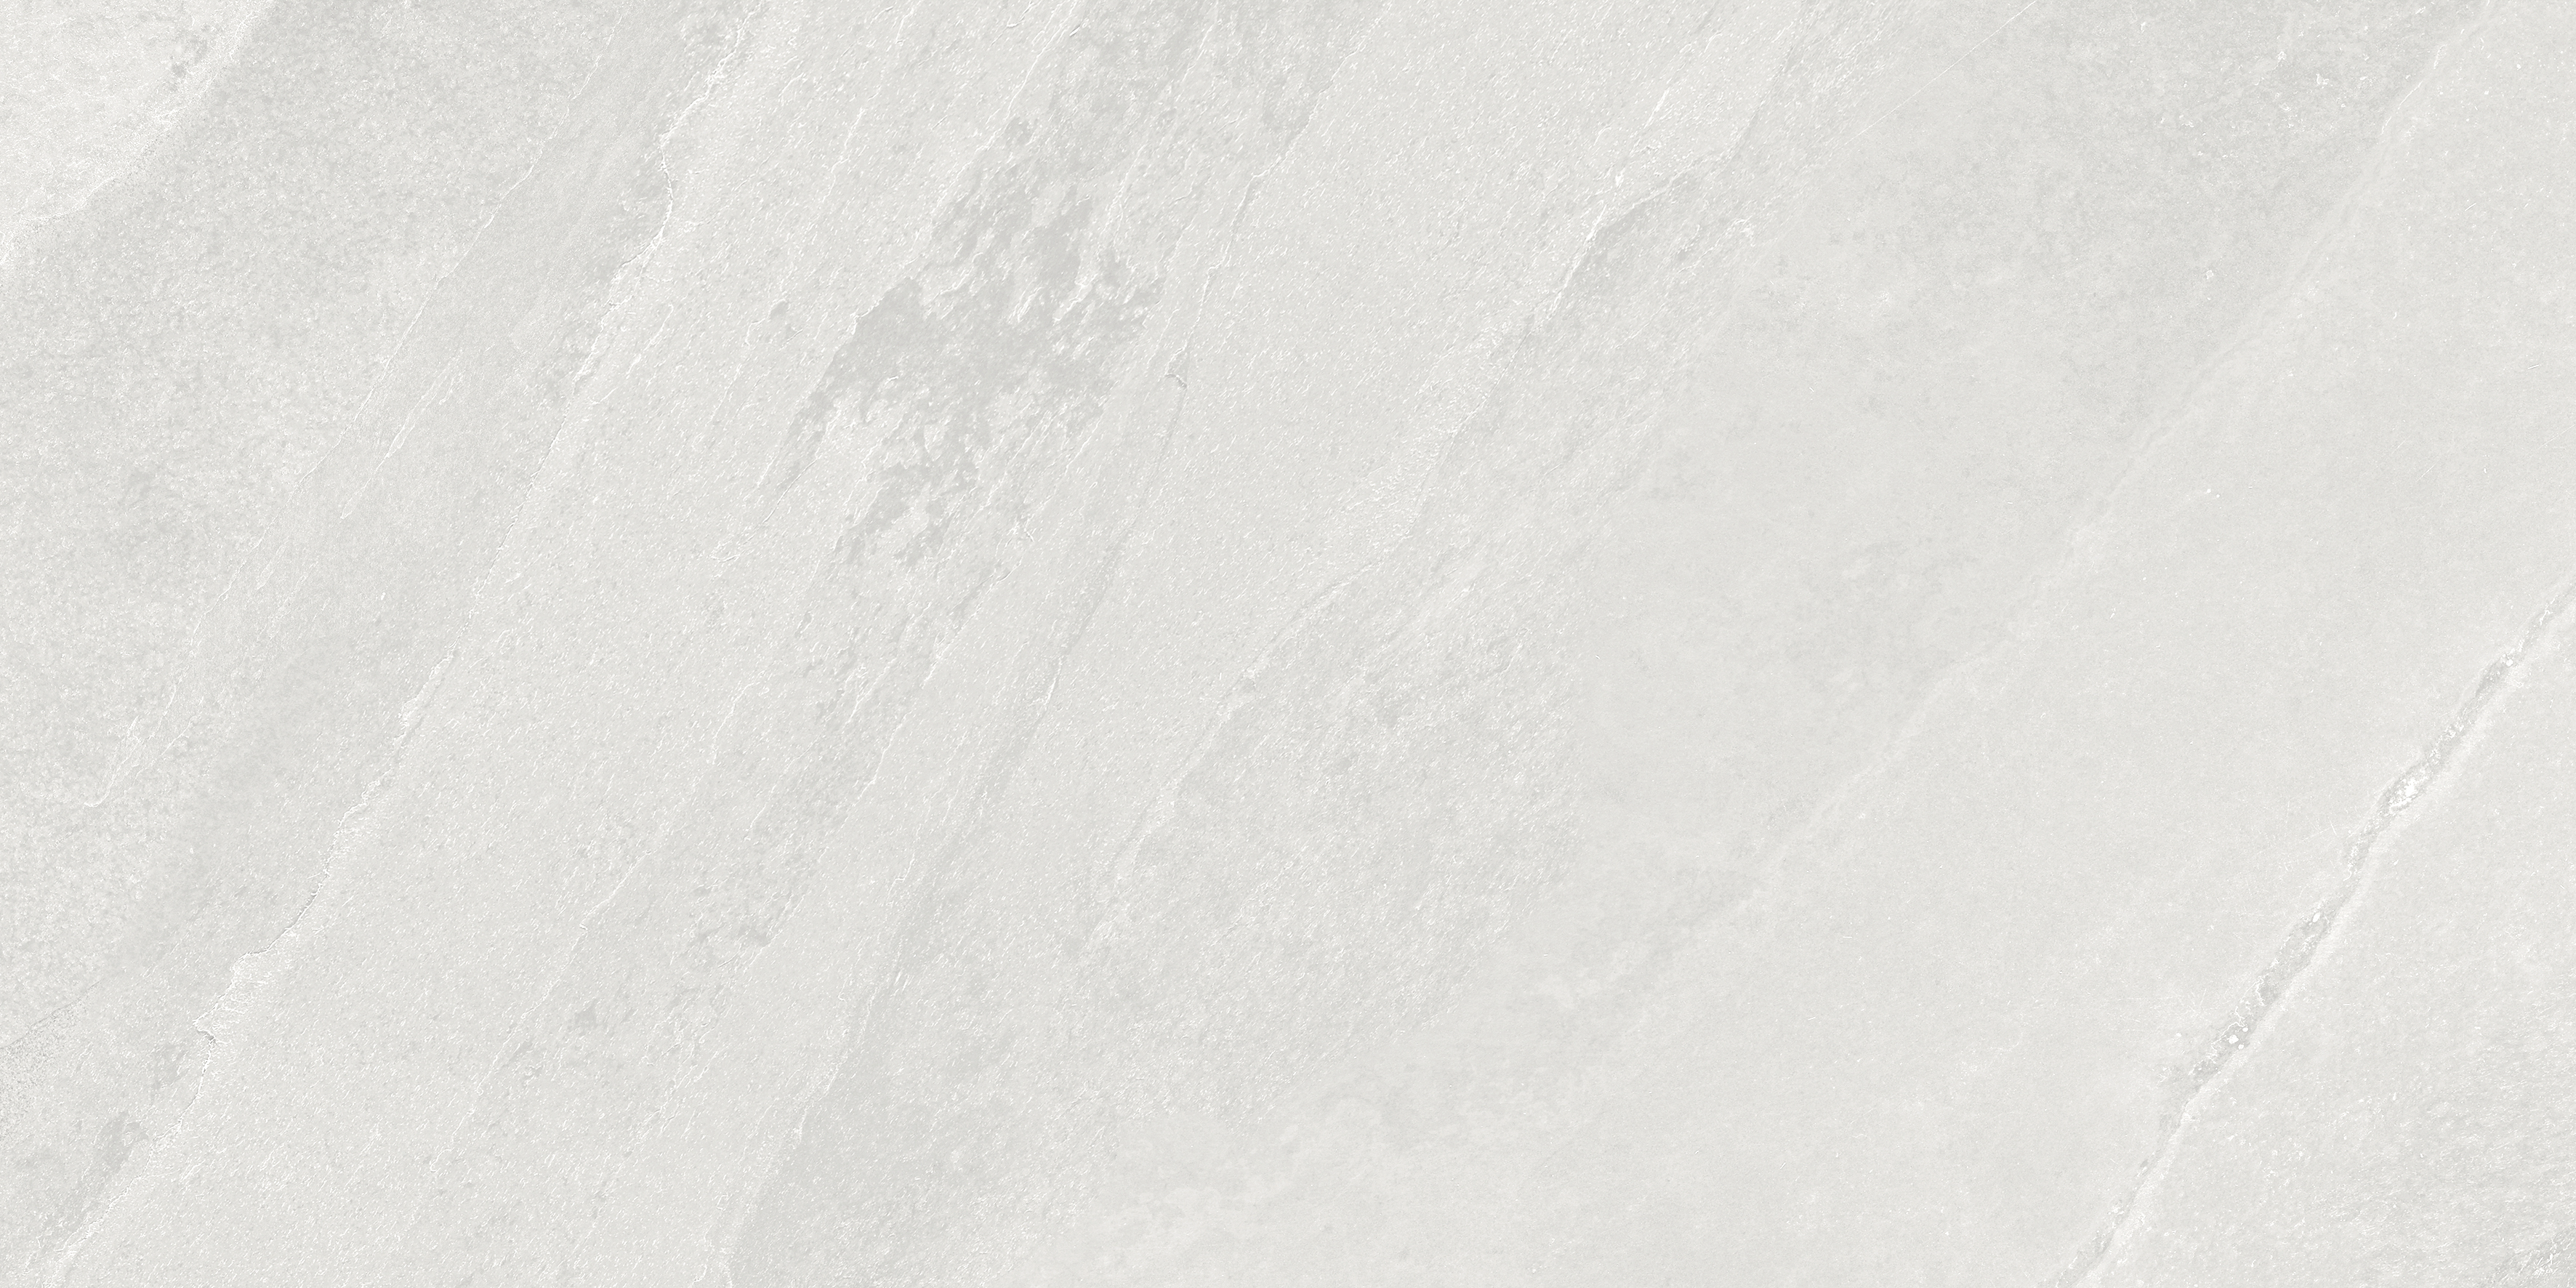 lithium pattern color body porcelain field tile from nord anatolia collection distributed by surface group international matte finish rectified edge 12x24 rectangle shape